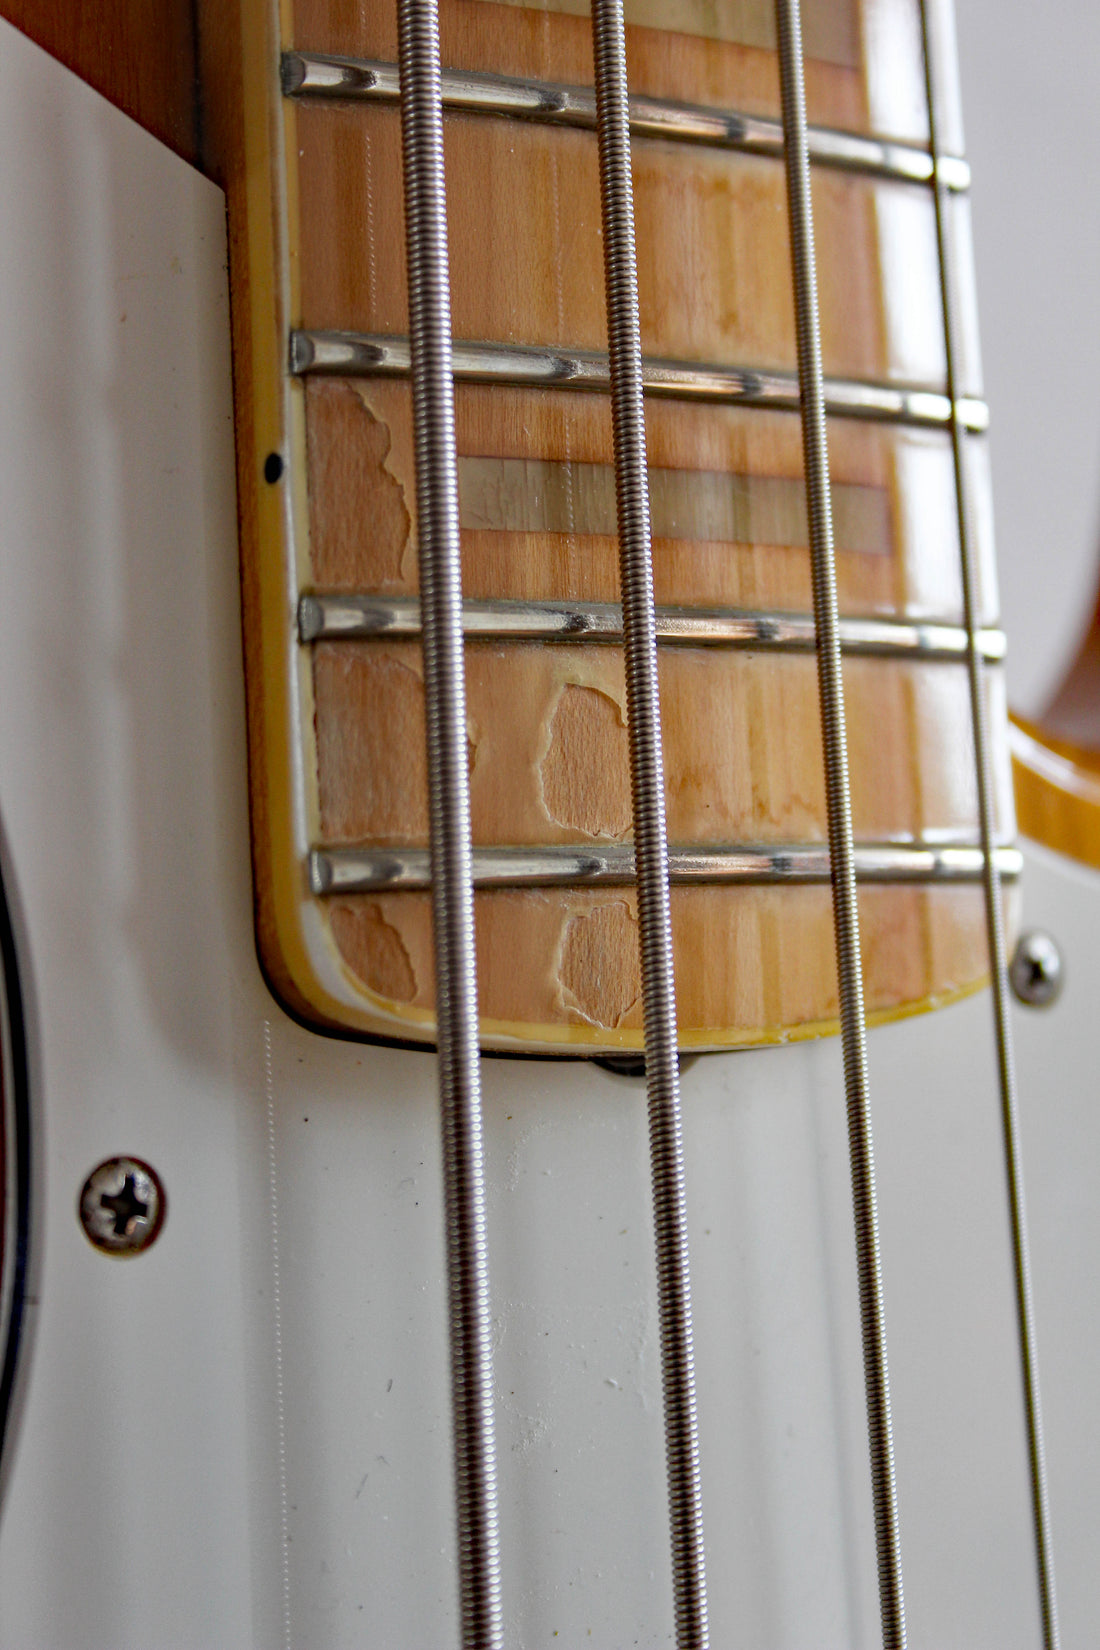 Used Fender Jazz Bass '75 Reissue Natural 1984-7